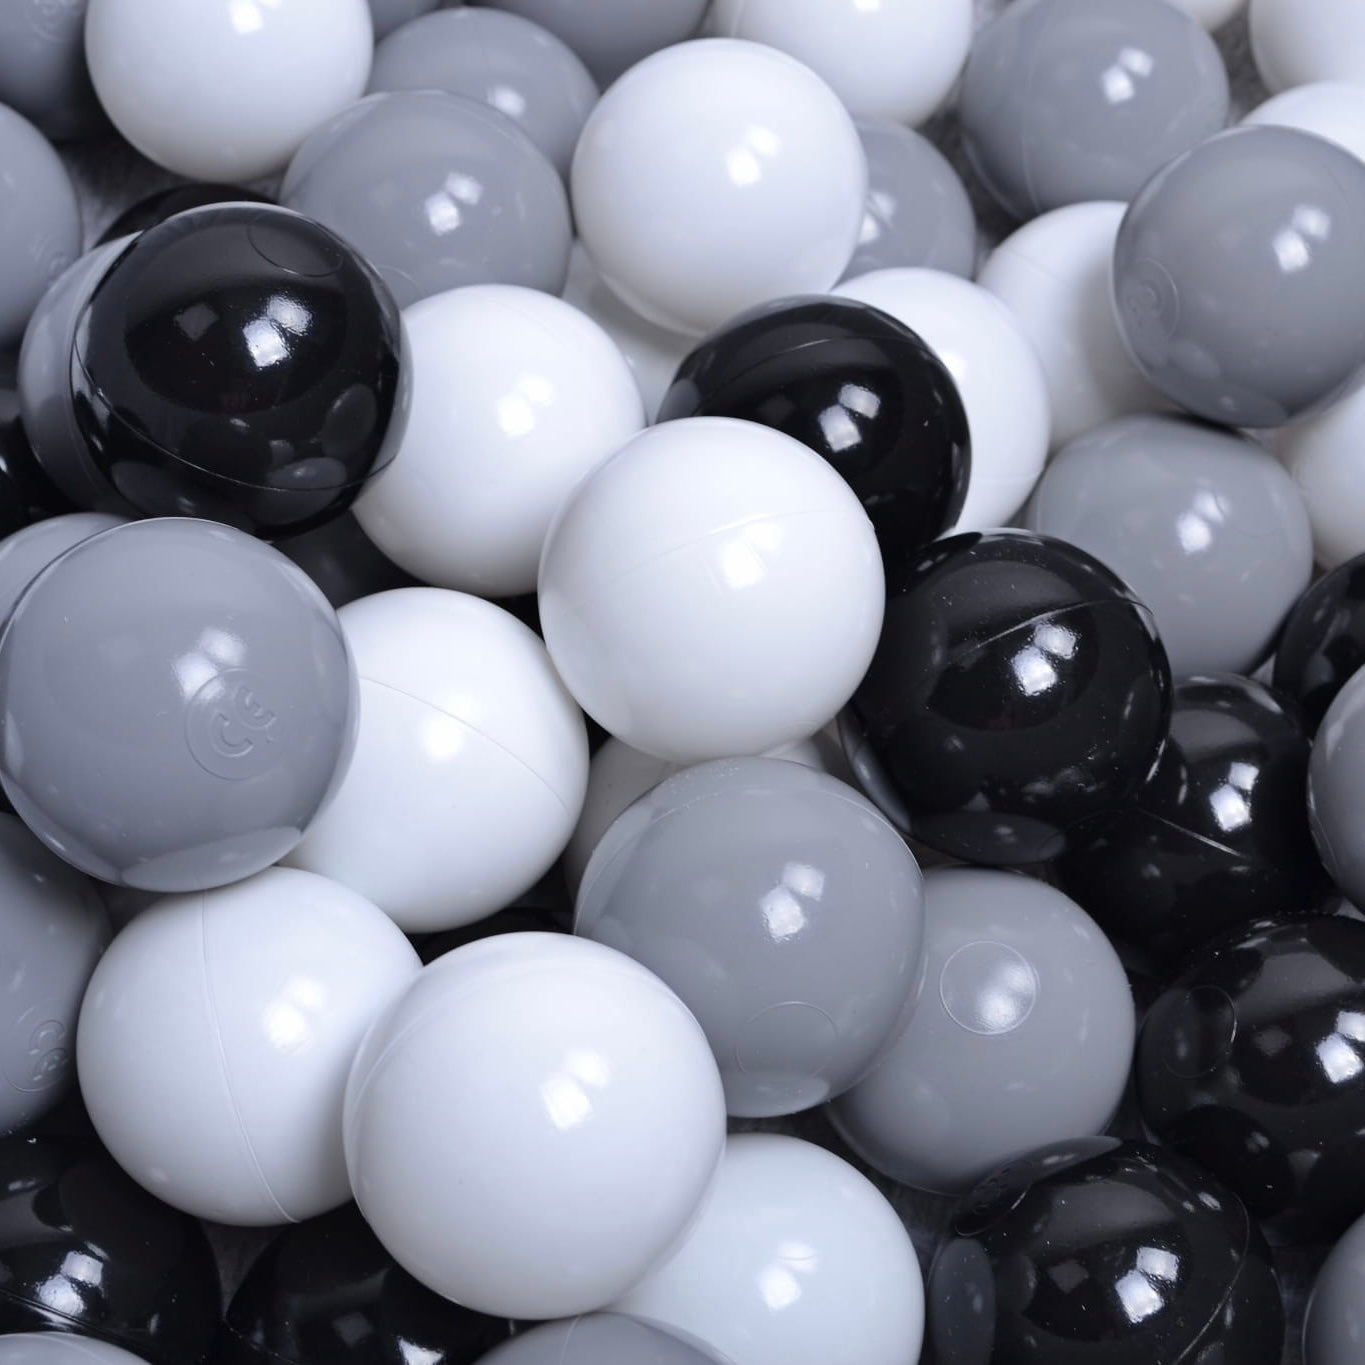 Make Your Own Ball Pit | Cotton Black